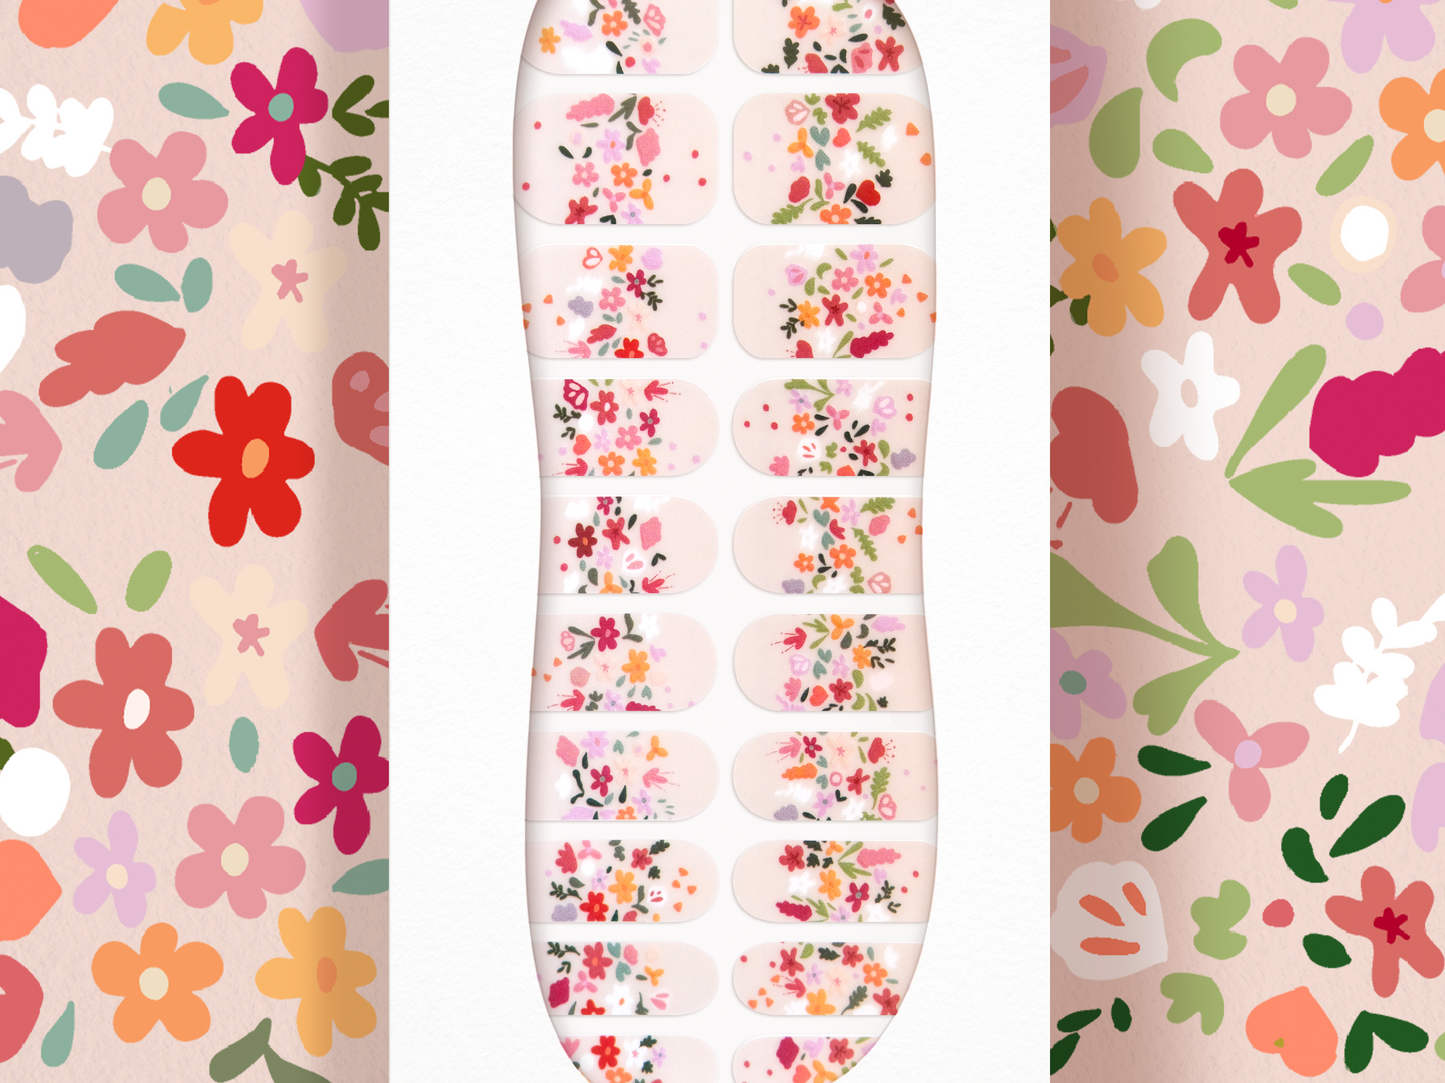 Translucent "French Wildflower Bouquet” Floral Nail Wrap Kit